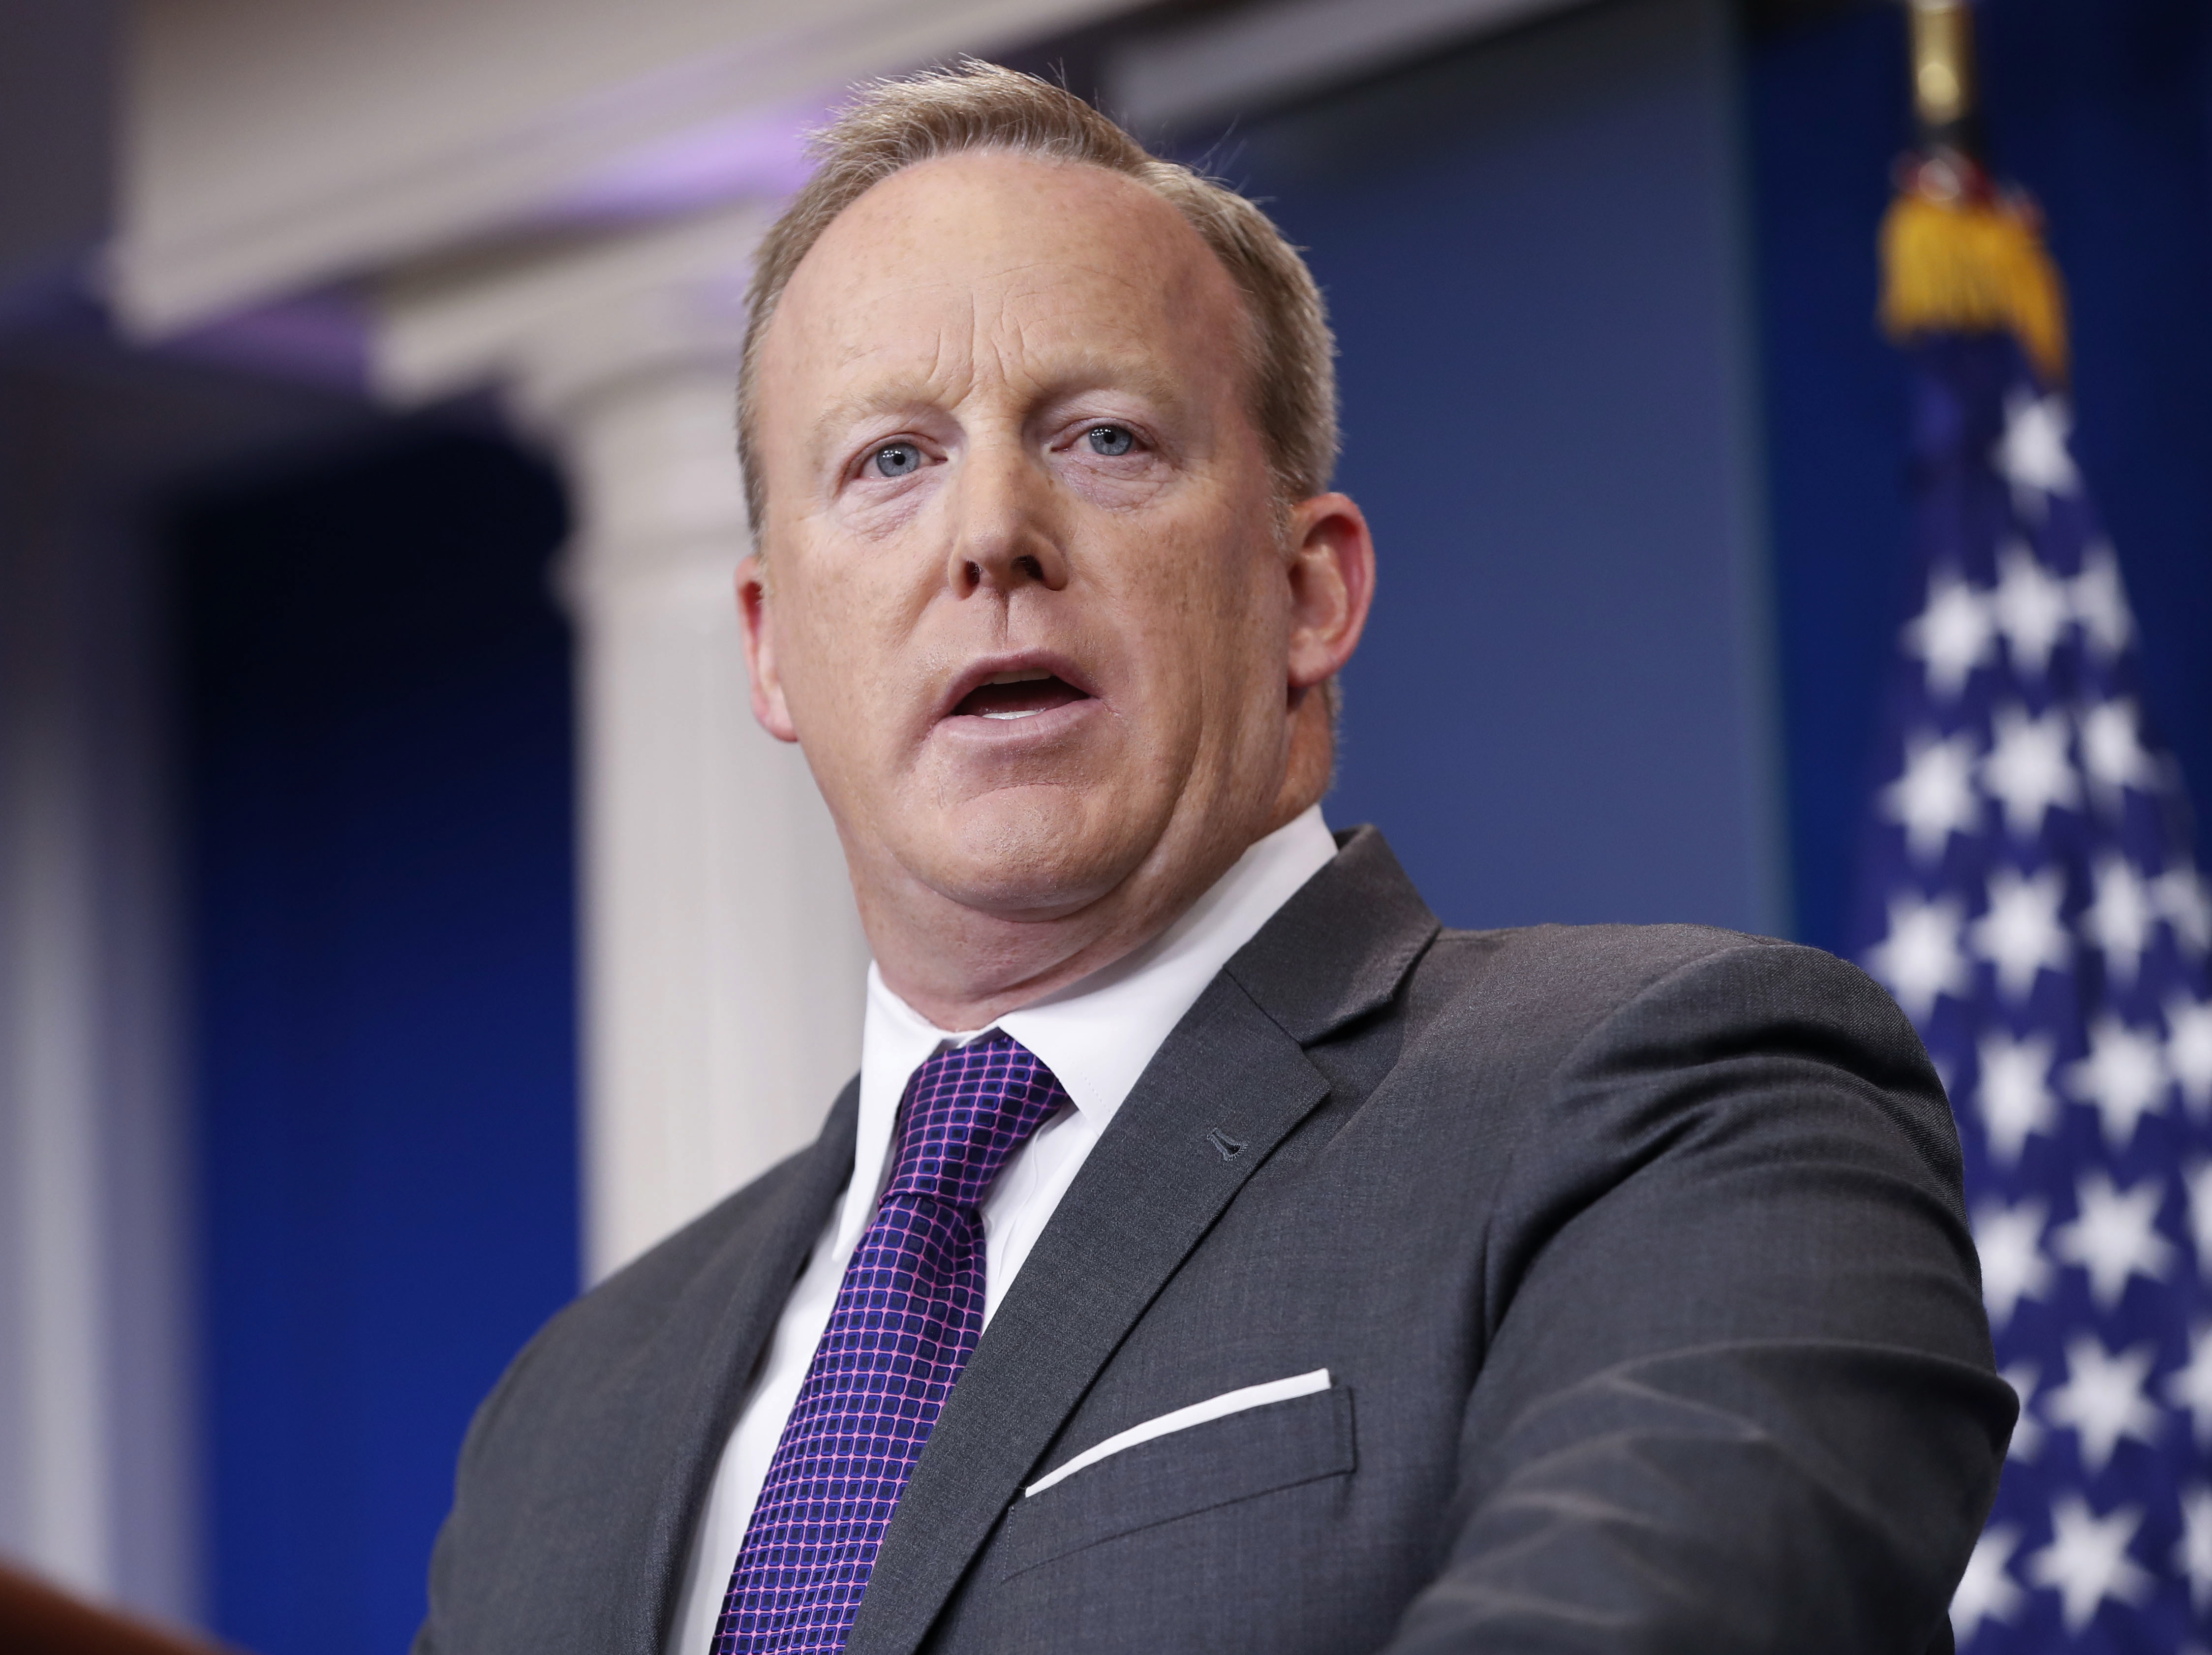 White House press secretary Sean Spicer speaks to members of the media in the Brady Briefing room of the White House in Washington, July 17, 2017. (Pablo Martinez Monsivais—AP)